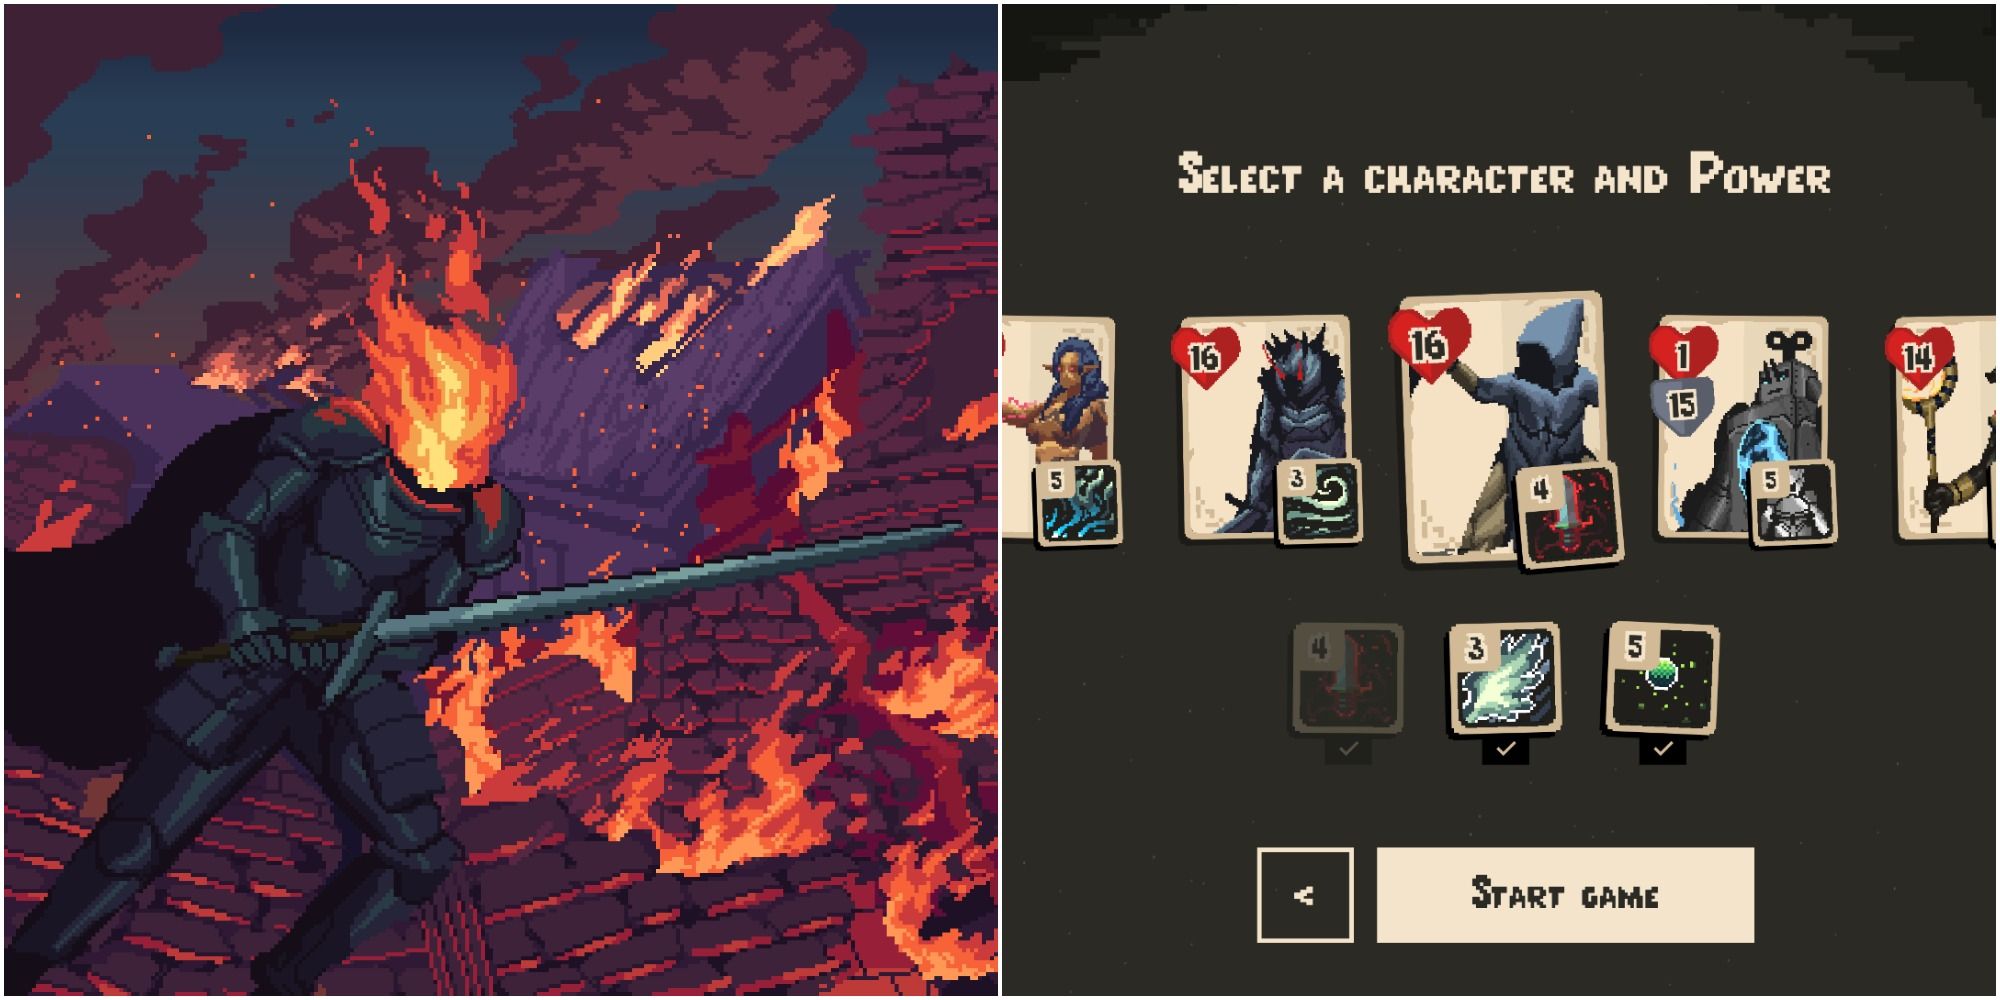 Forward Escape the Fold split image A knight on fire in front of a burning castle and a character select screen made from card